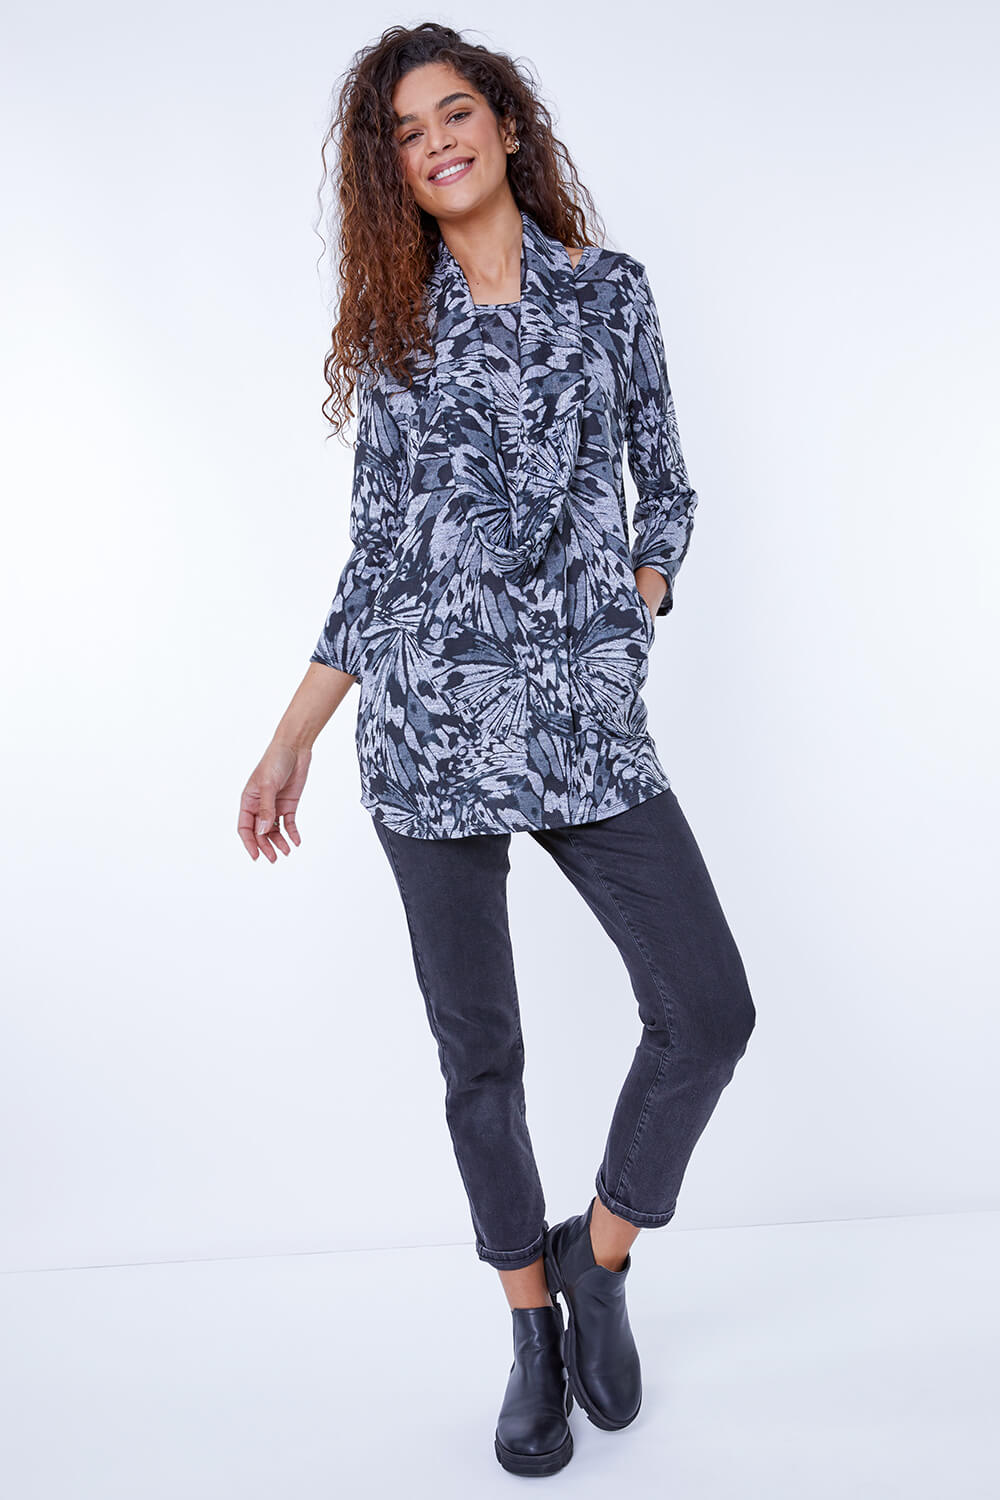 Black Butterfly Print Tunic Top With Snood, Image 2 of 5